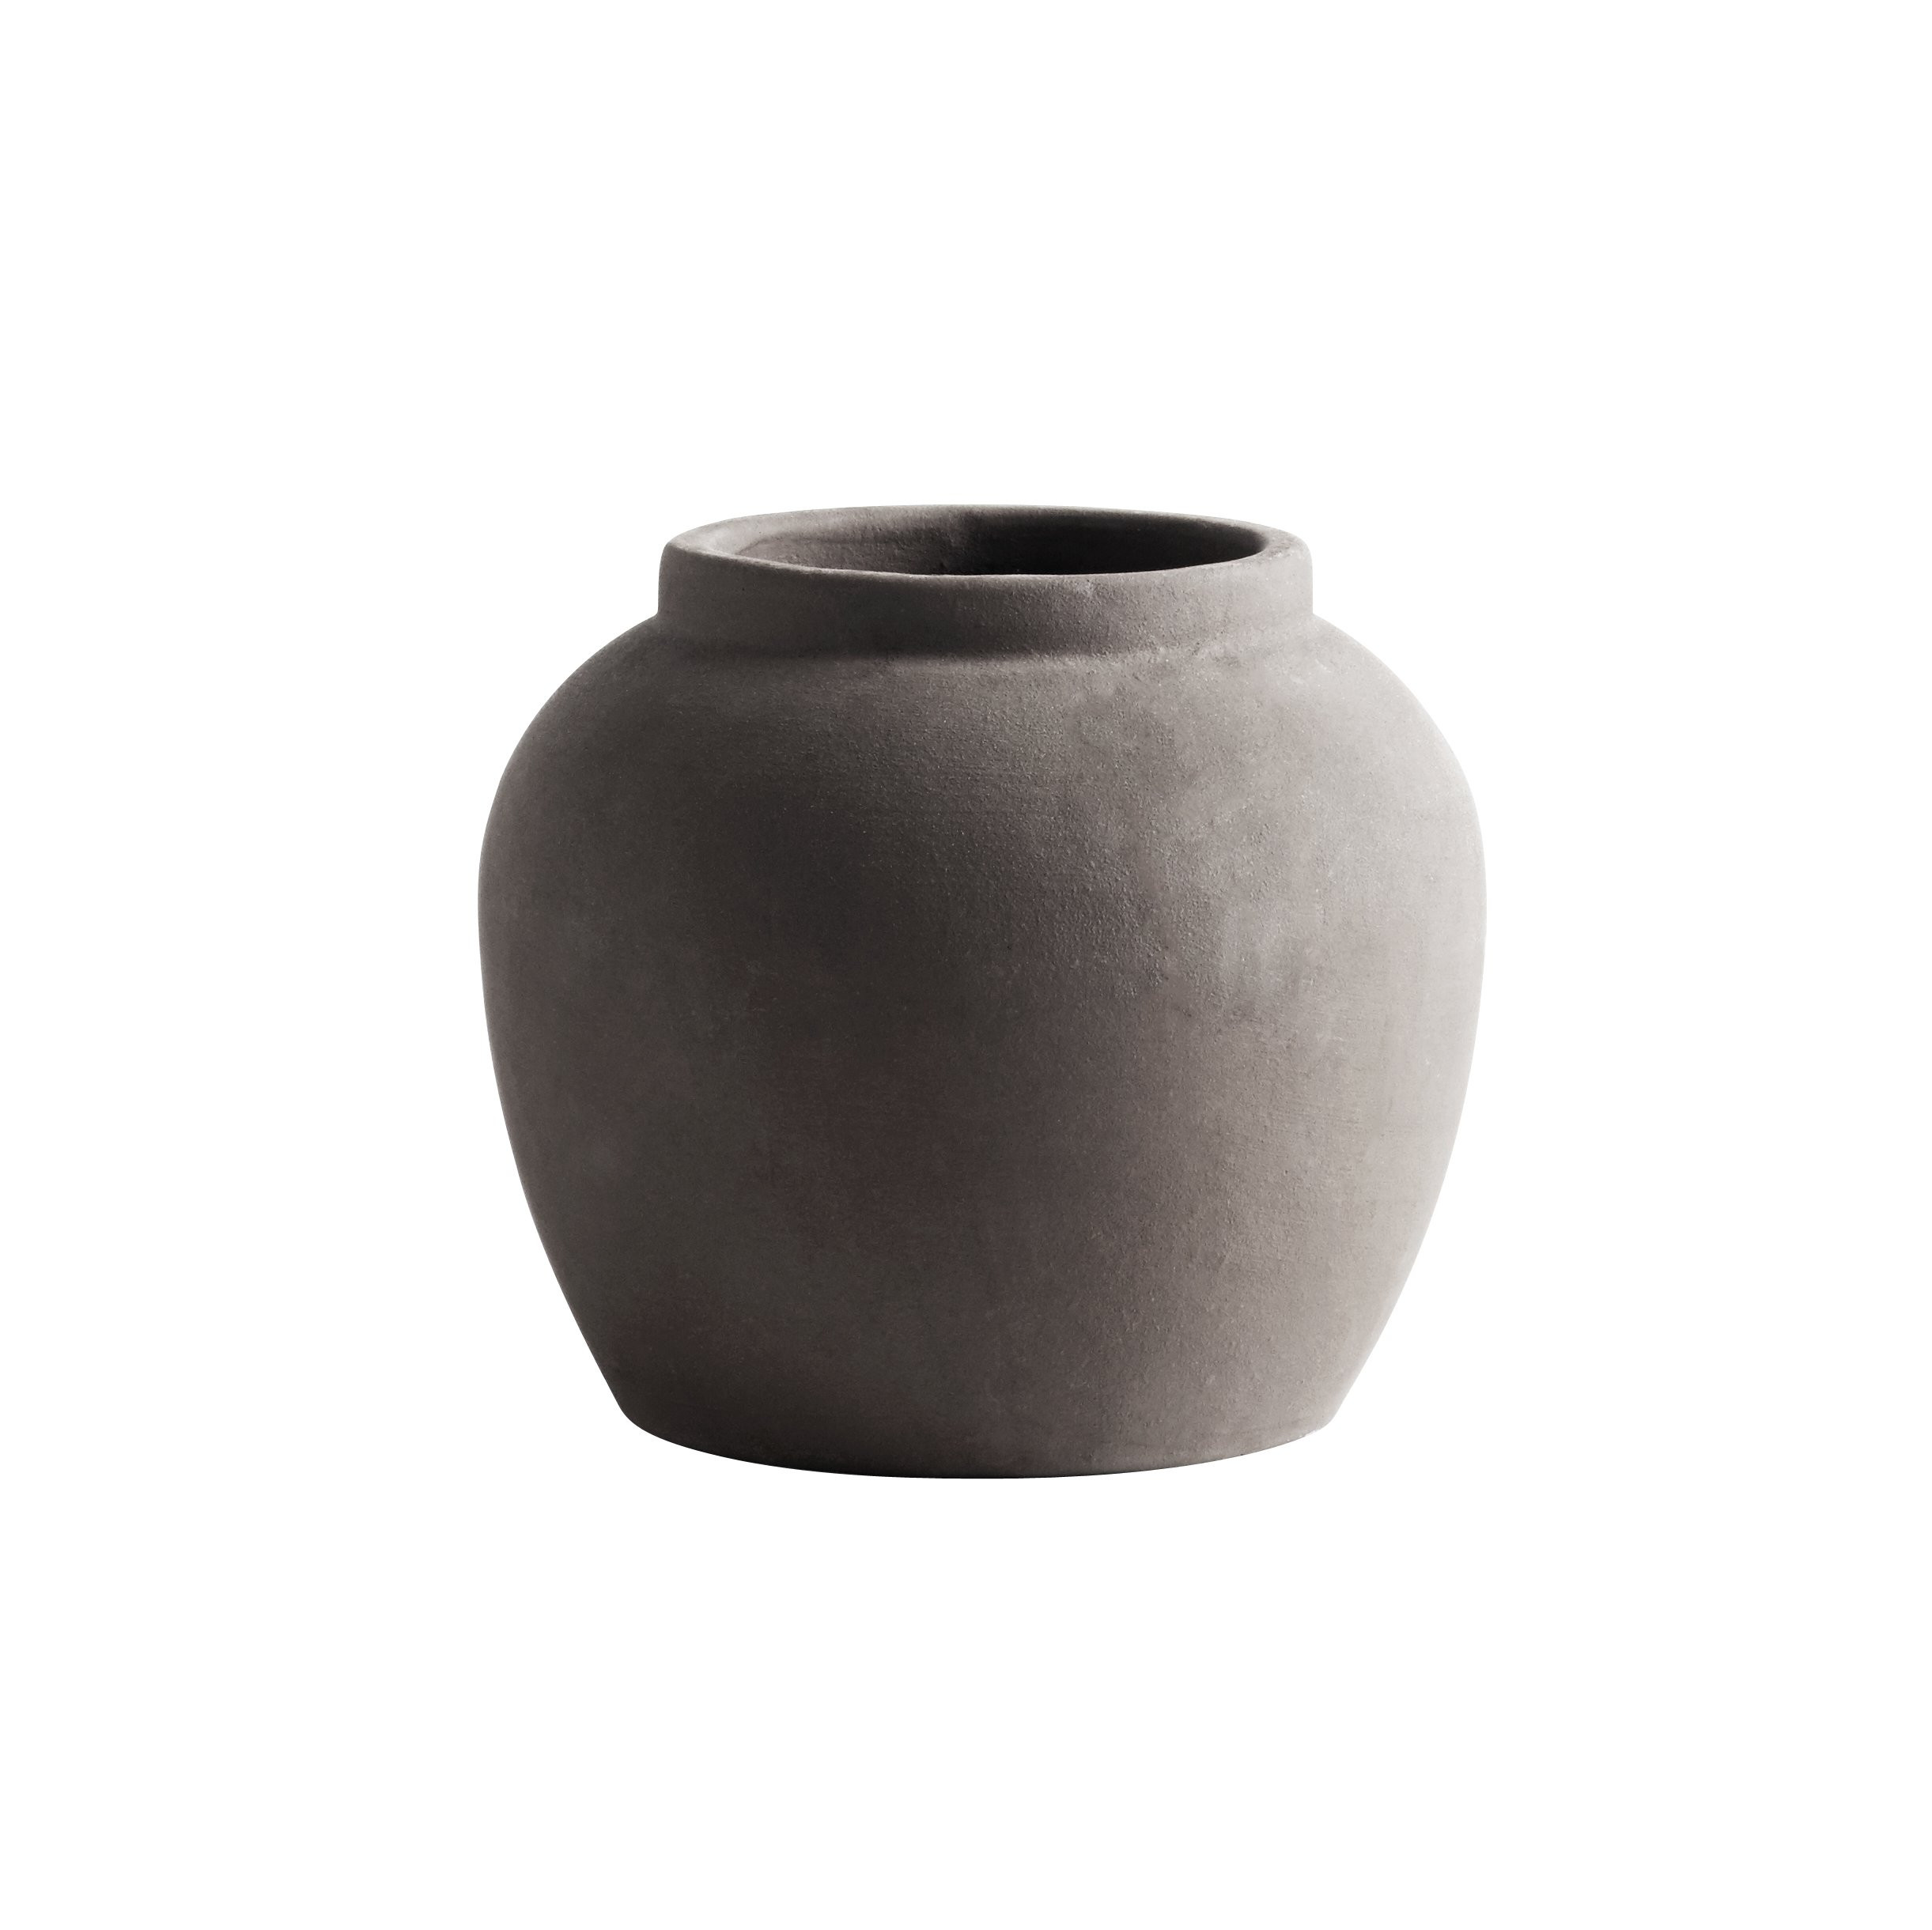 24 Great Large White Urn Vase 2023 free download large white urn vase of jar clay s d18xh24 smoke products tine k home inside jarvase s smo